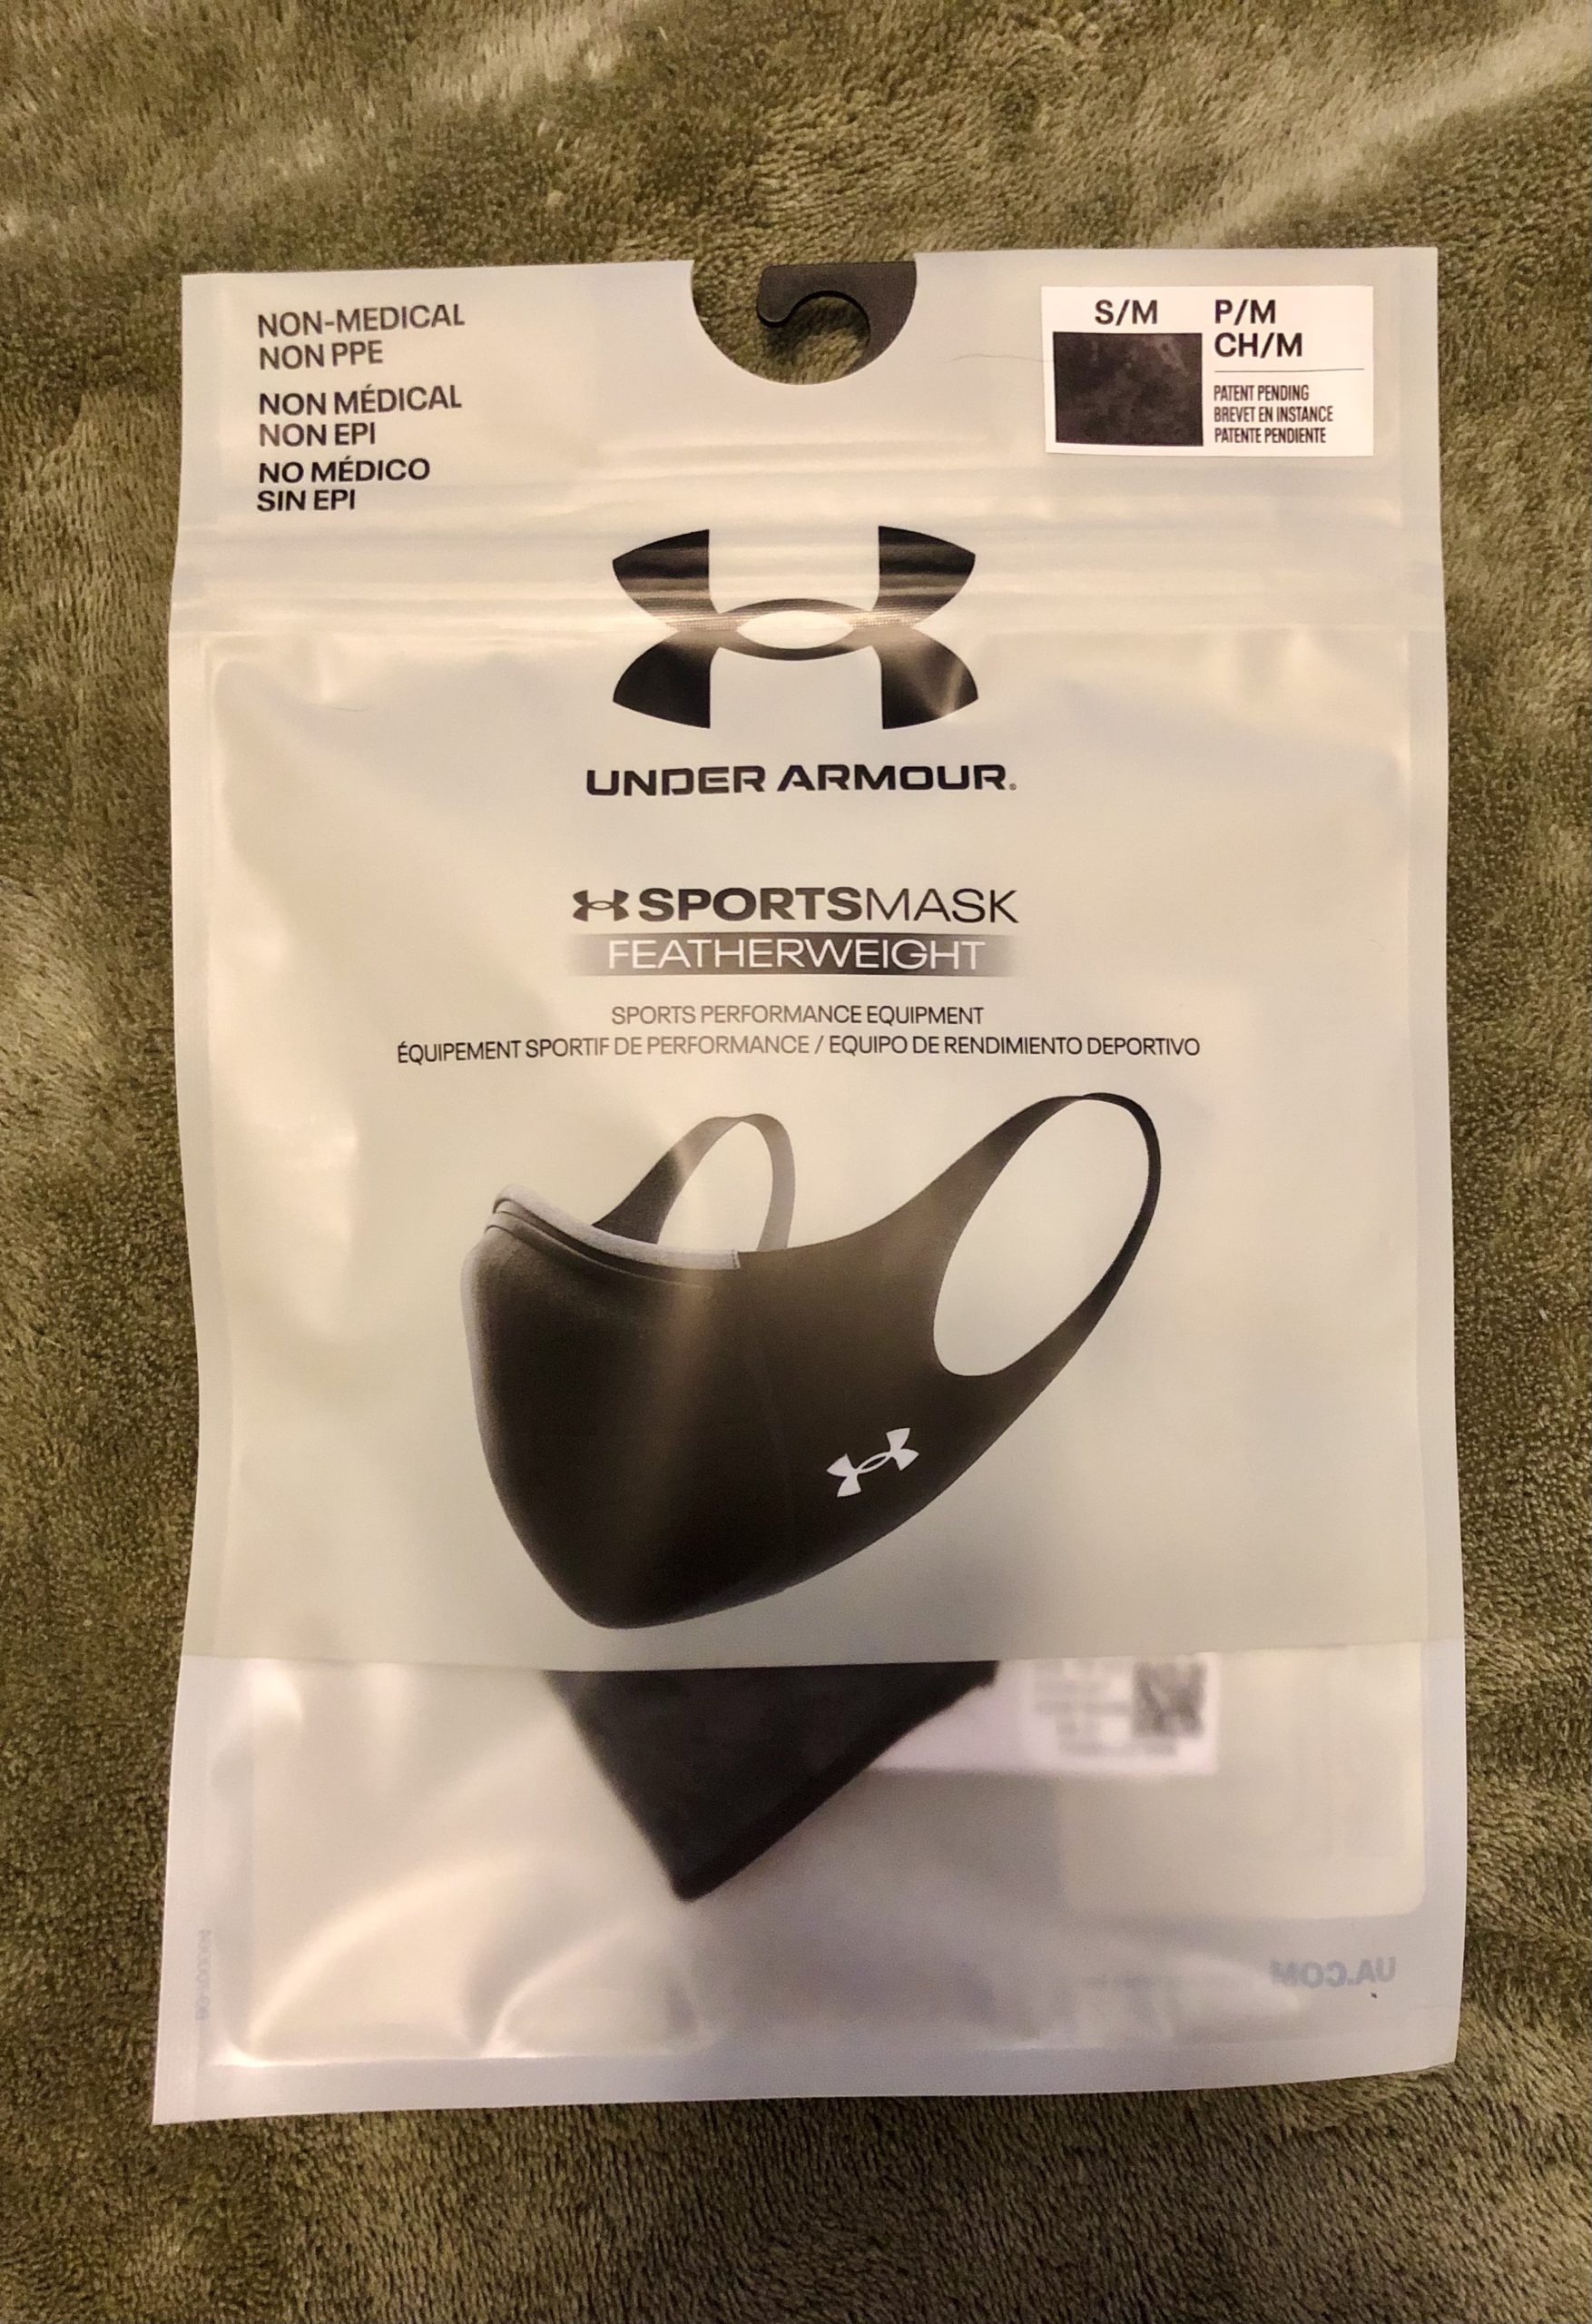 Under Armour Sportsmask front of packaging